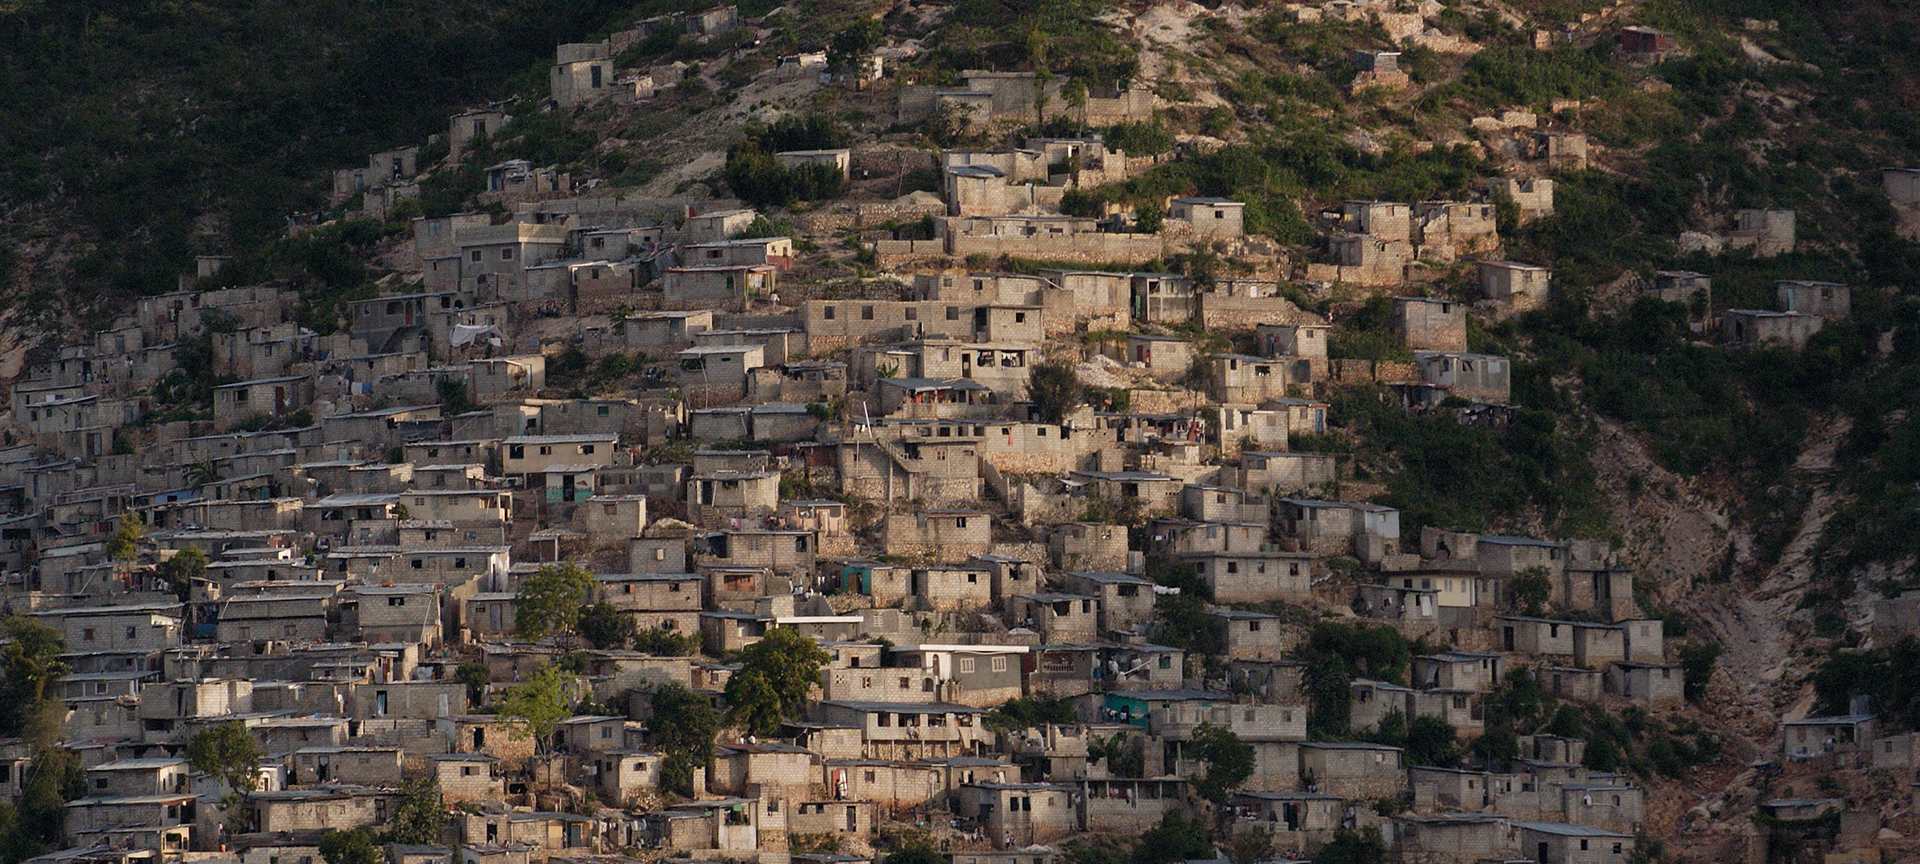 Small brown buildings situated along a green mountainside